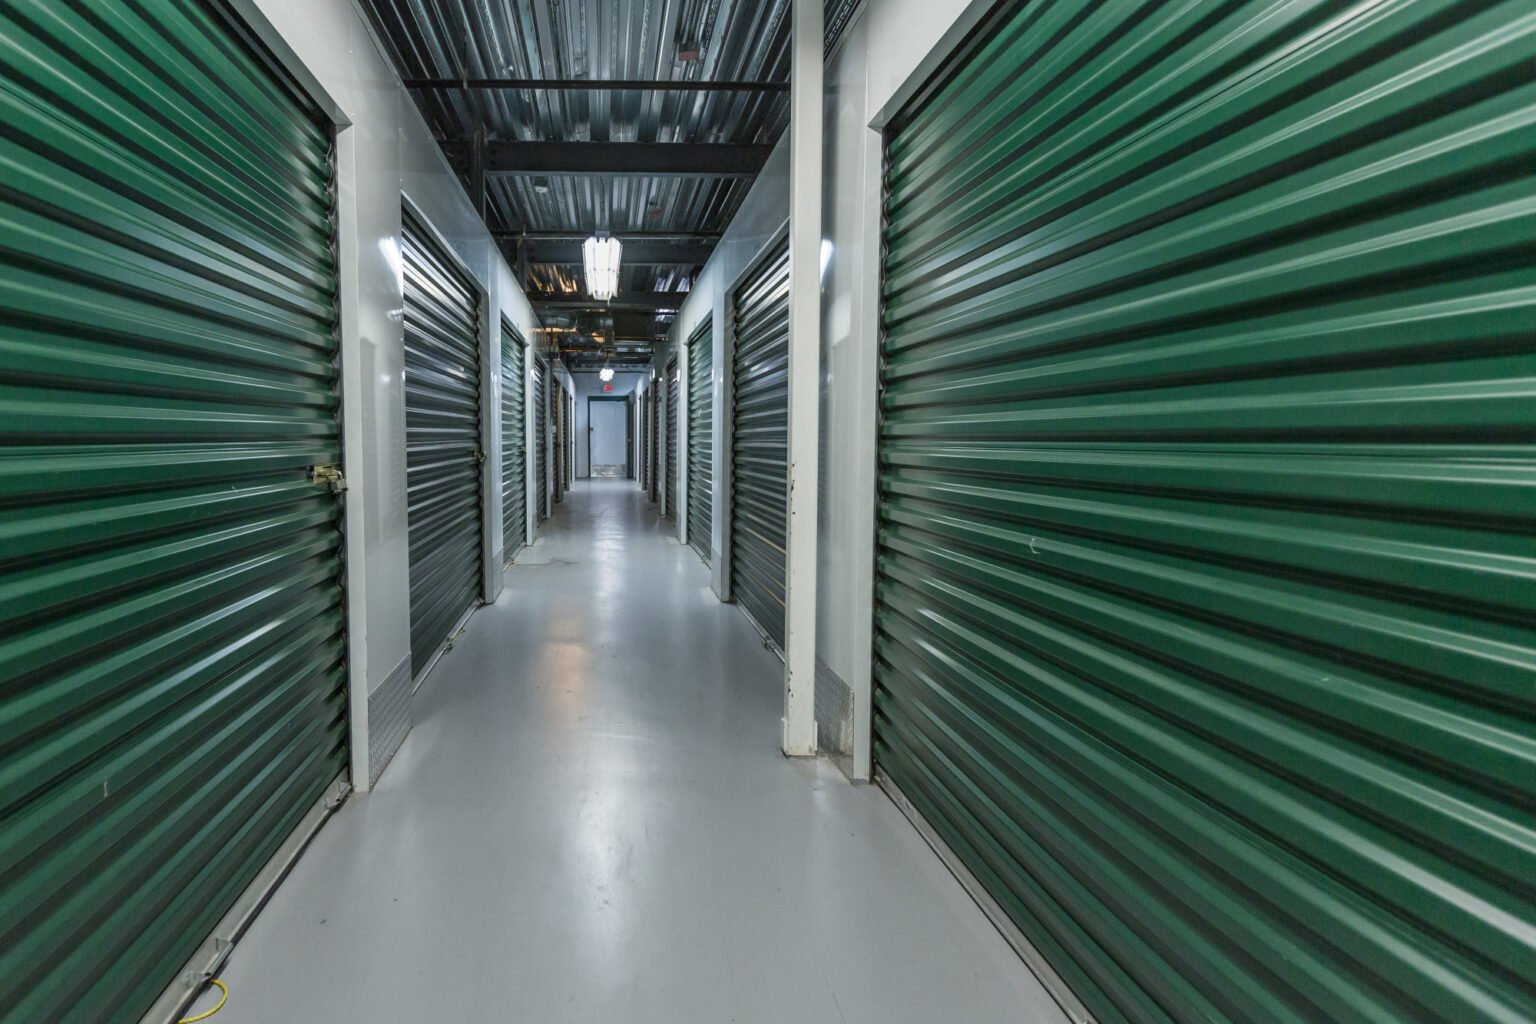 Have you just accepted a job offer that involves relocating to a new city? Here's why you may need a storage facility.